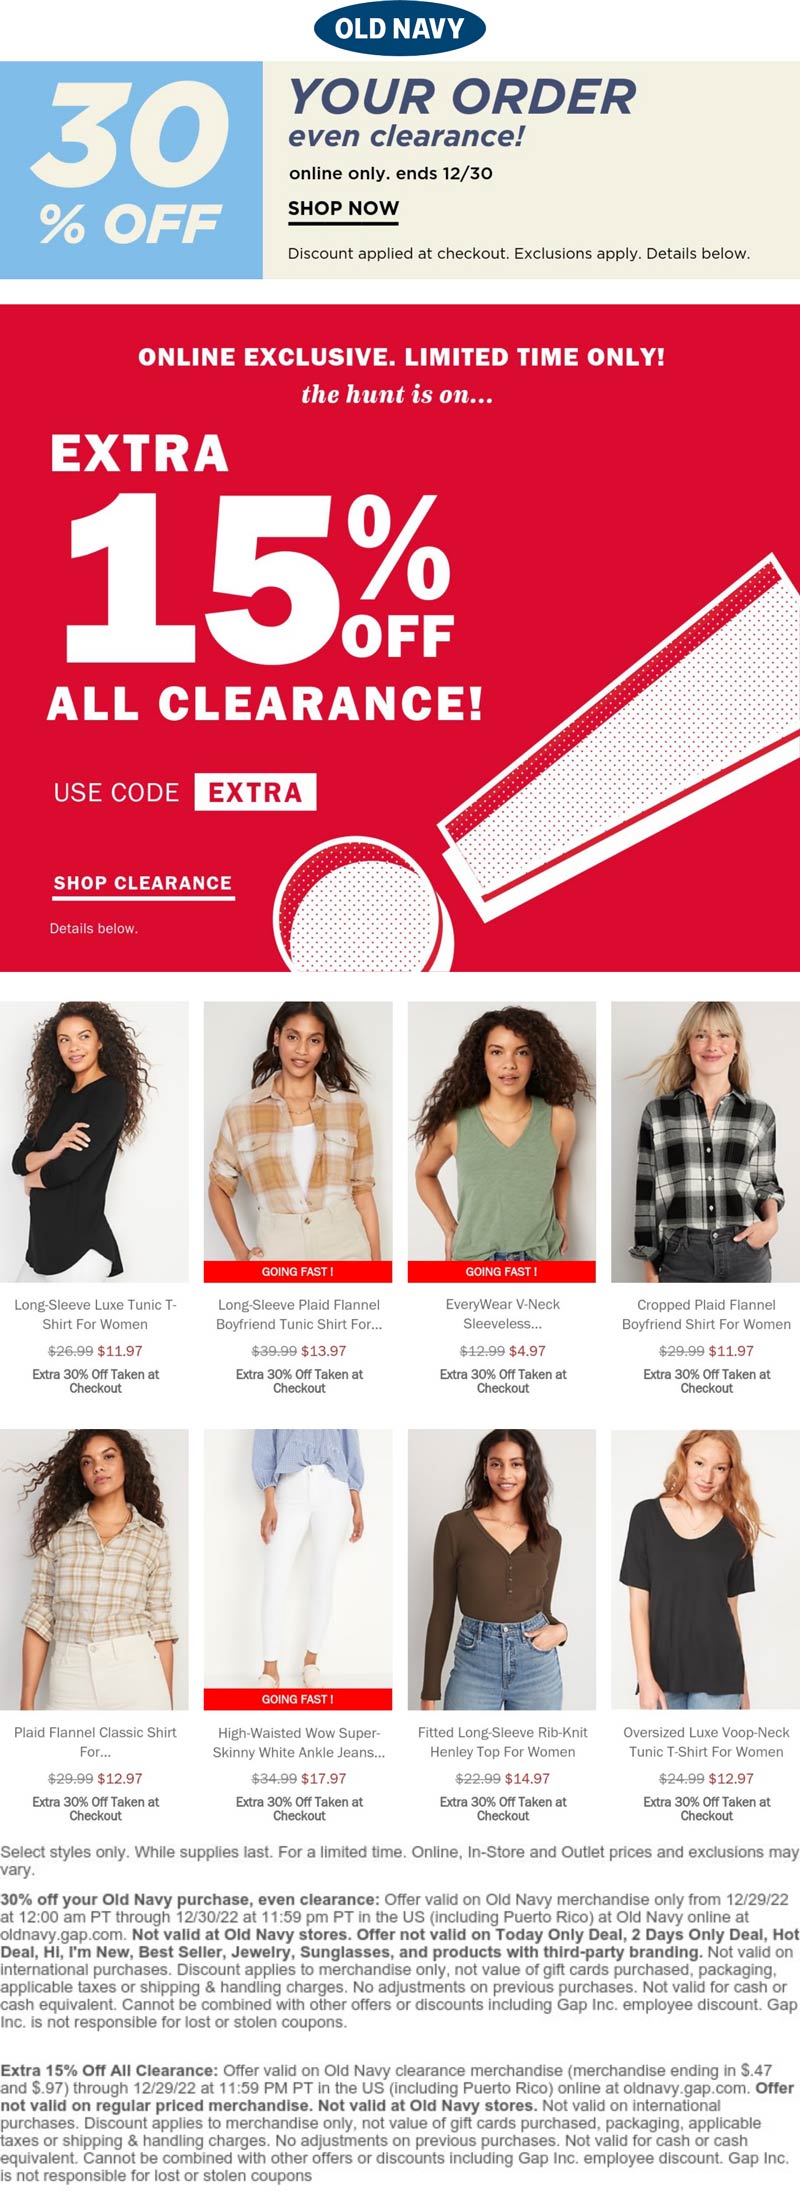 Old Navy stores Coupon  30% off everything + extra 15% off clearance at Old Navy via promo code EXTRA #oldnavy 